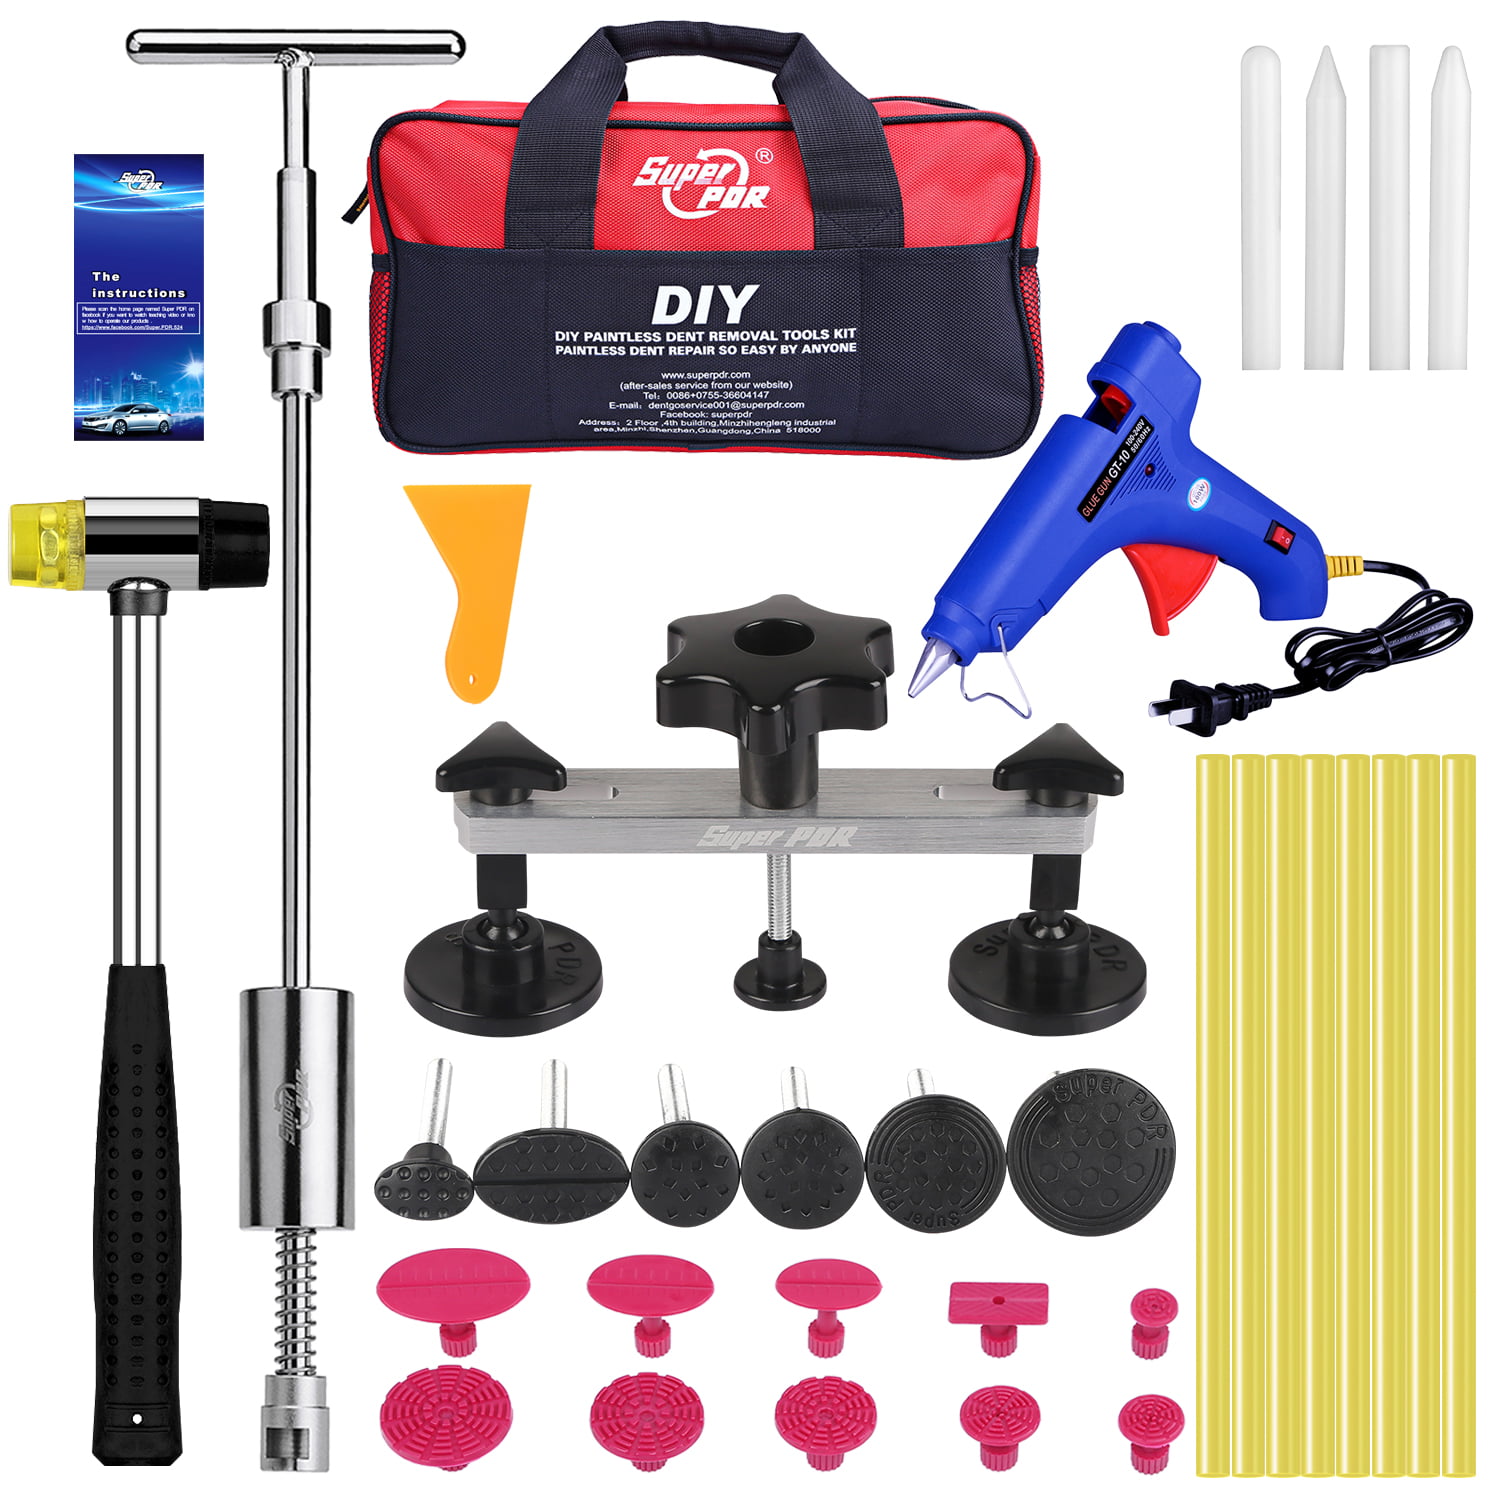 Details about   Super PDR Tools Paintless Dent Puller Removal Kits Hail Repair Auto Body Damage 